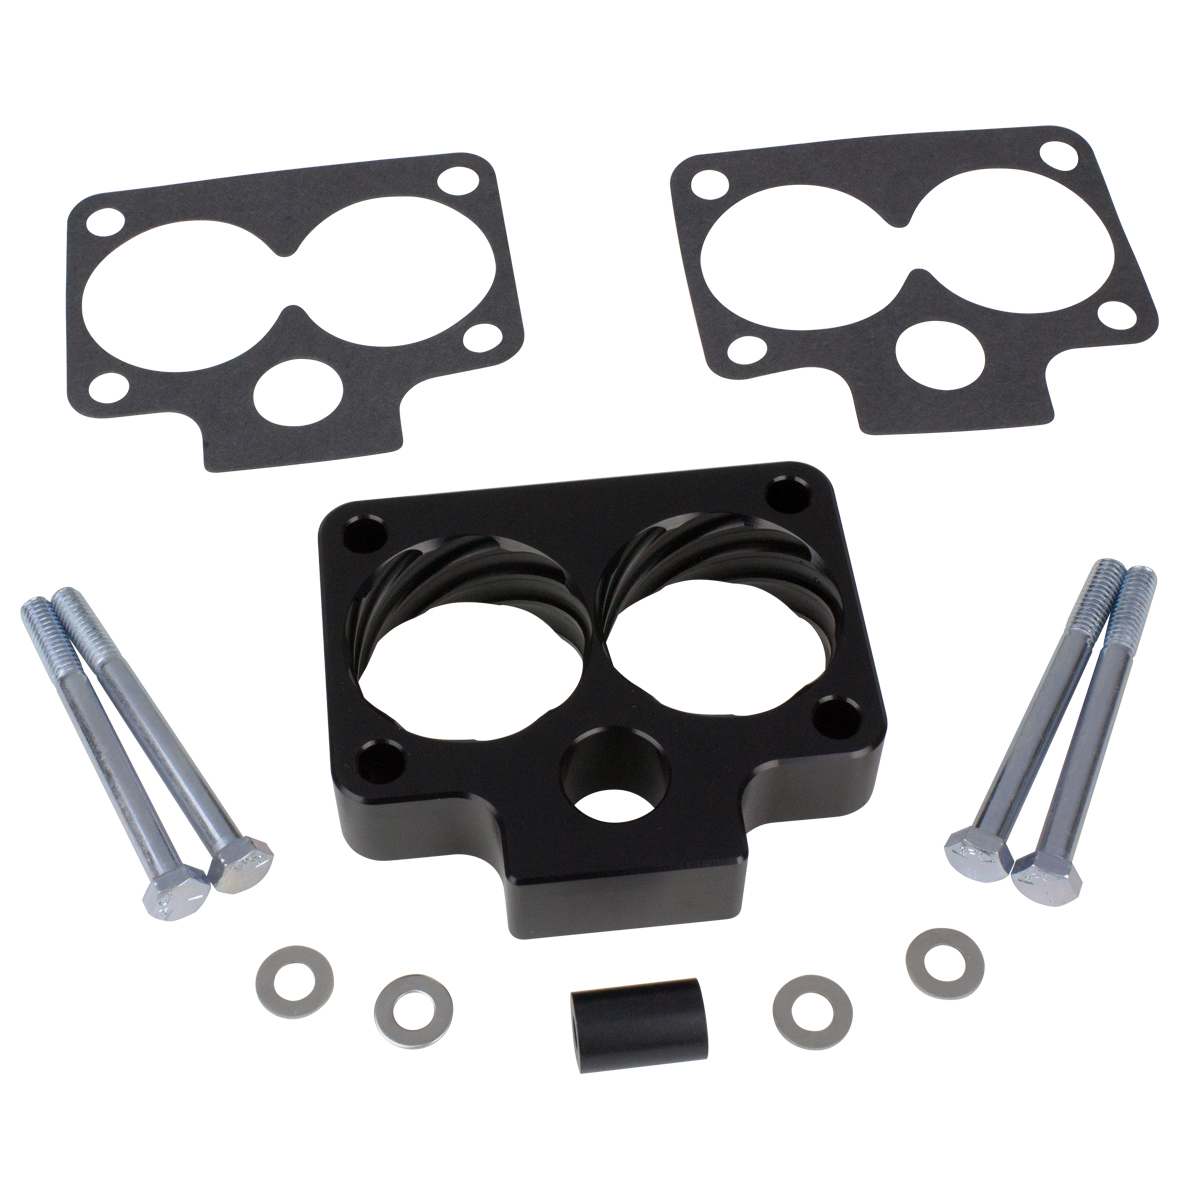 Fits 94-01 Dodge Ram 1500 2WD 4WD Throttle Body Spacer Horsepower Fuel Ram 1500 Throttle Body Spacer Worth It